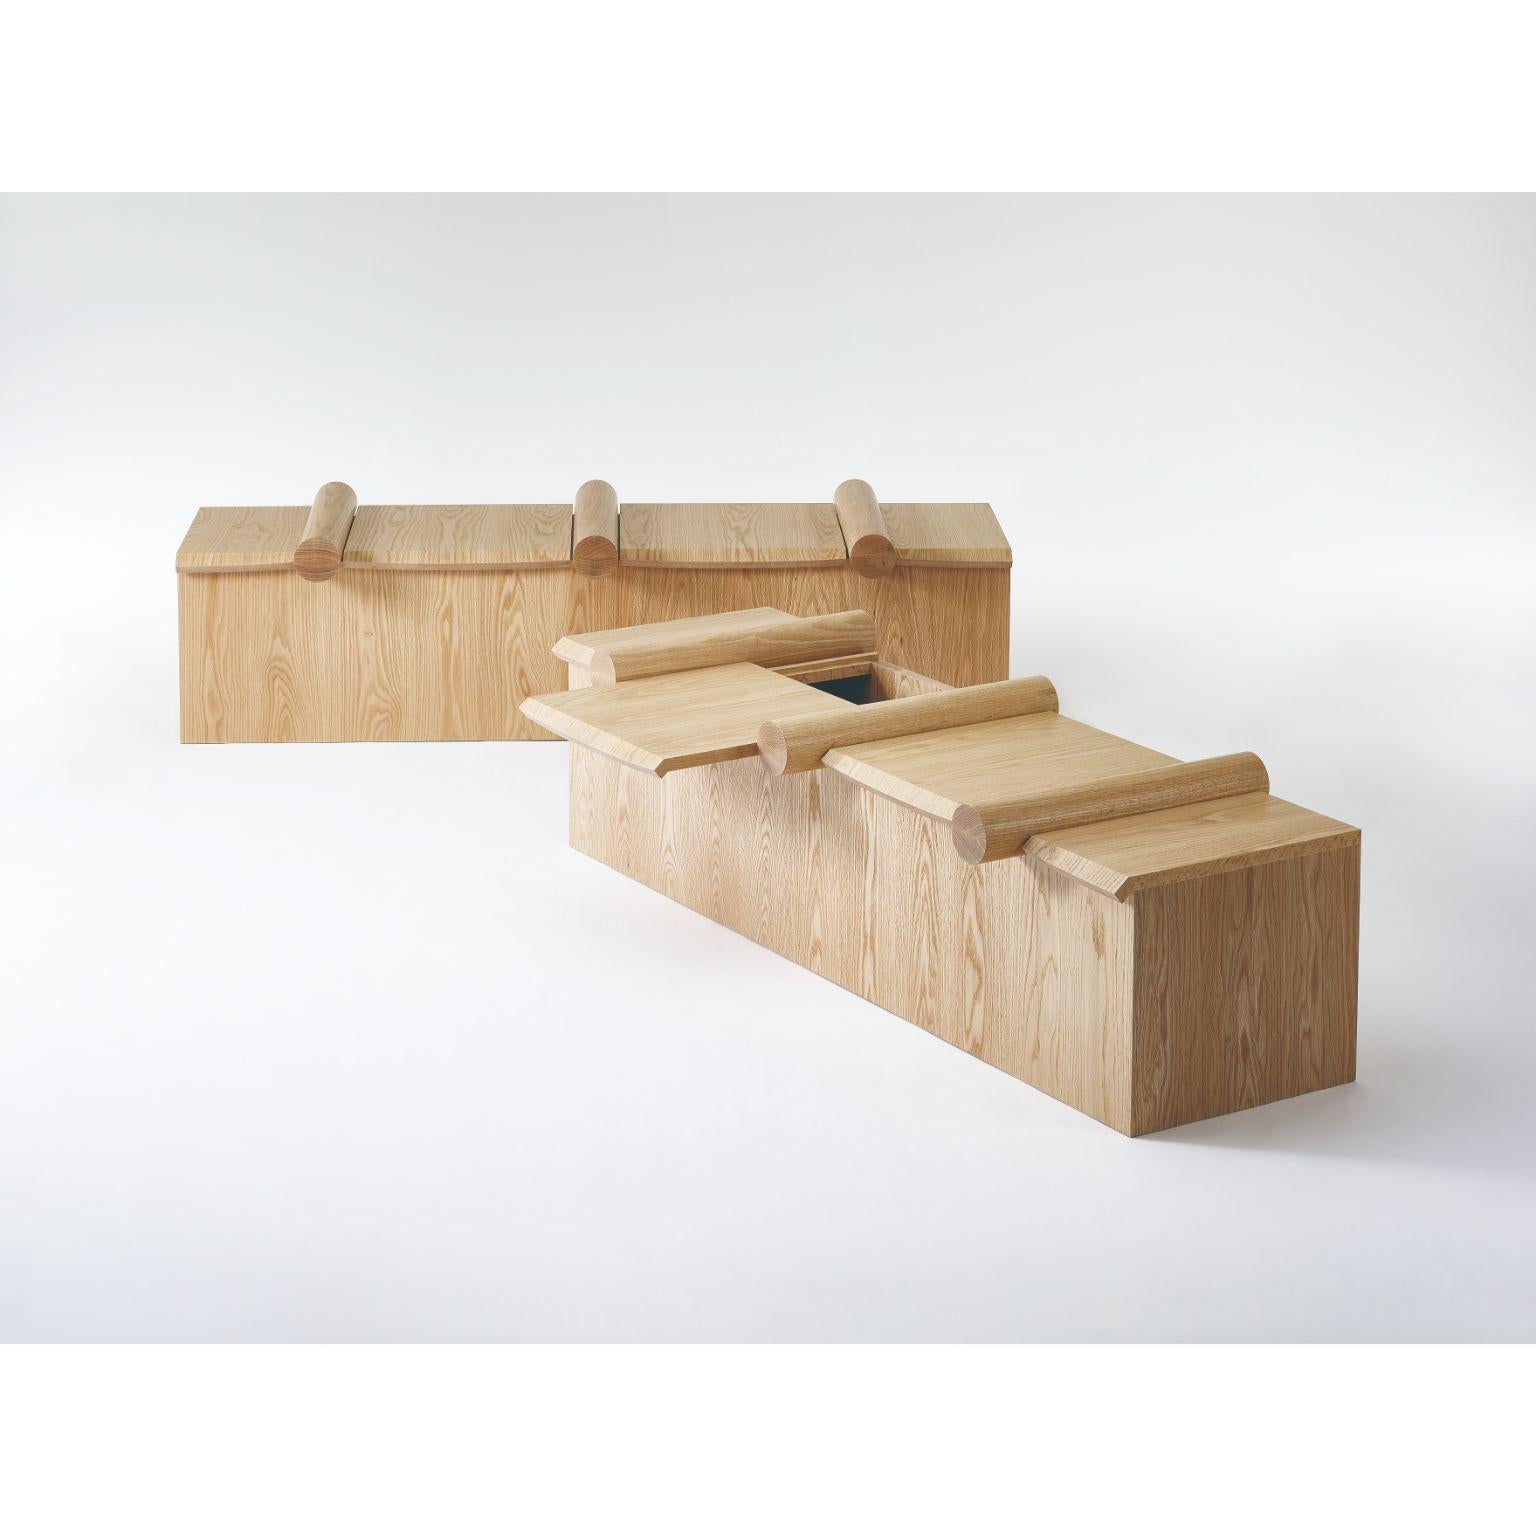 Set of 2 Heritage Giwa sideboards by Lee Jung Hoon
Dimensions: D163.2 x W53 x H41.1 cm
Materials: red oak

The Heritage series, created by designer Lee Jung-hoon is a collection of sculptural modern furniture. The designs are inspired by the